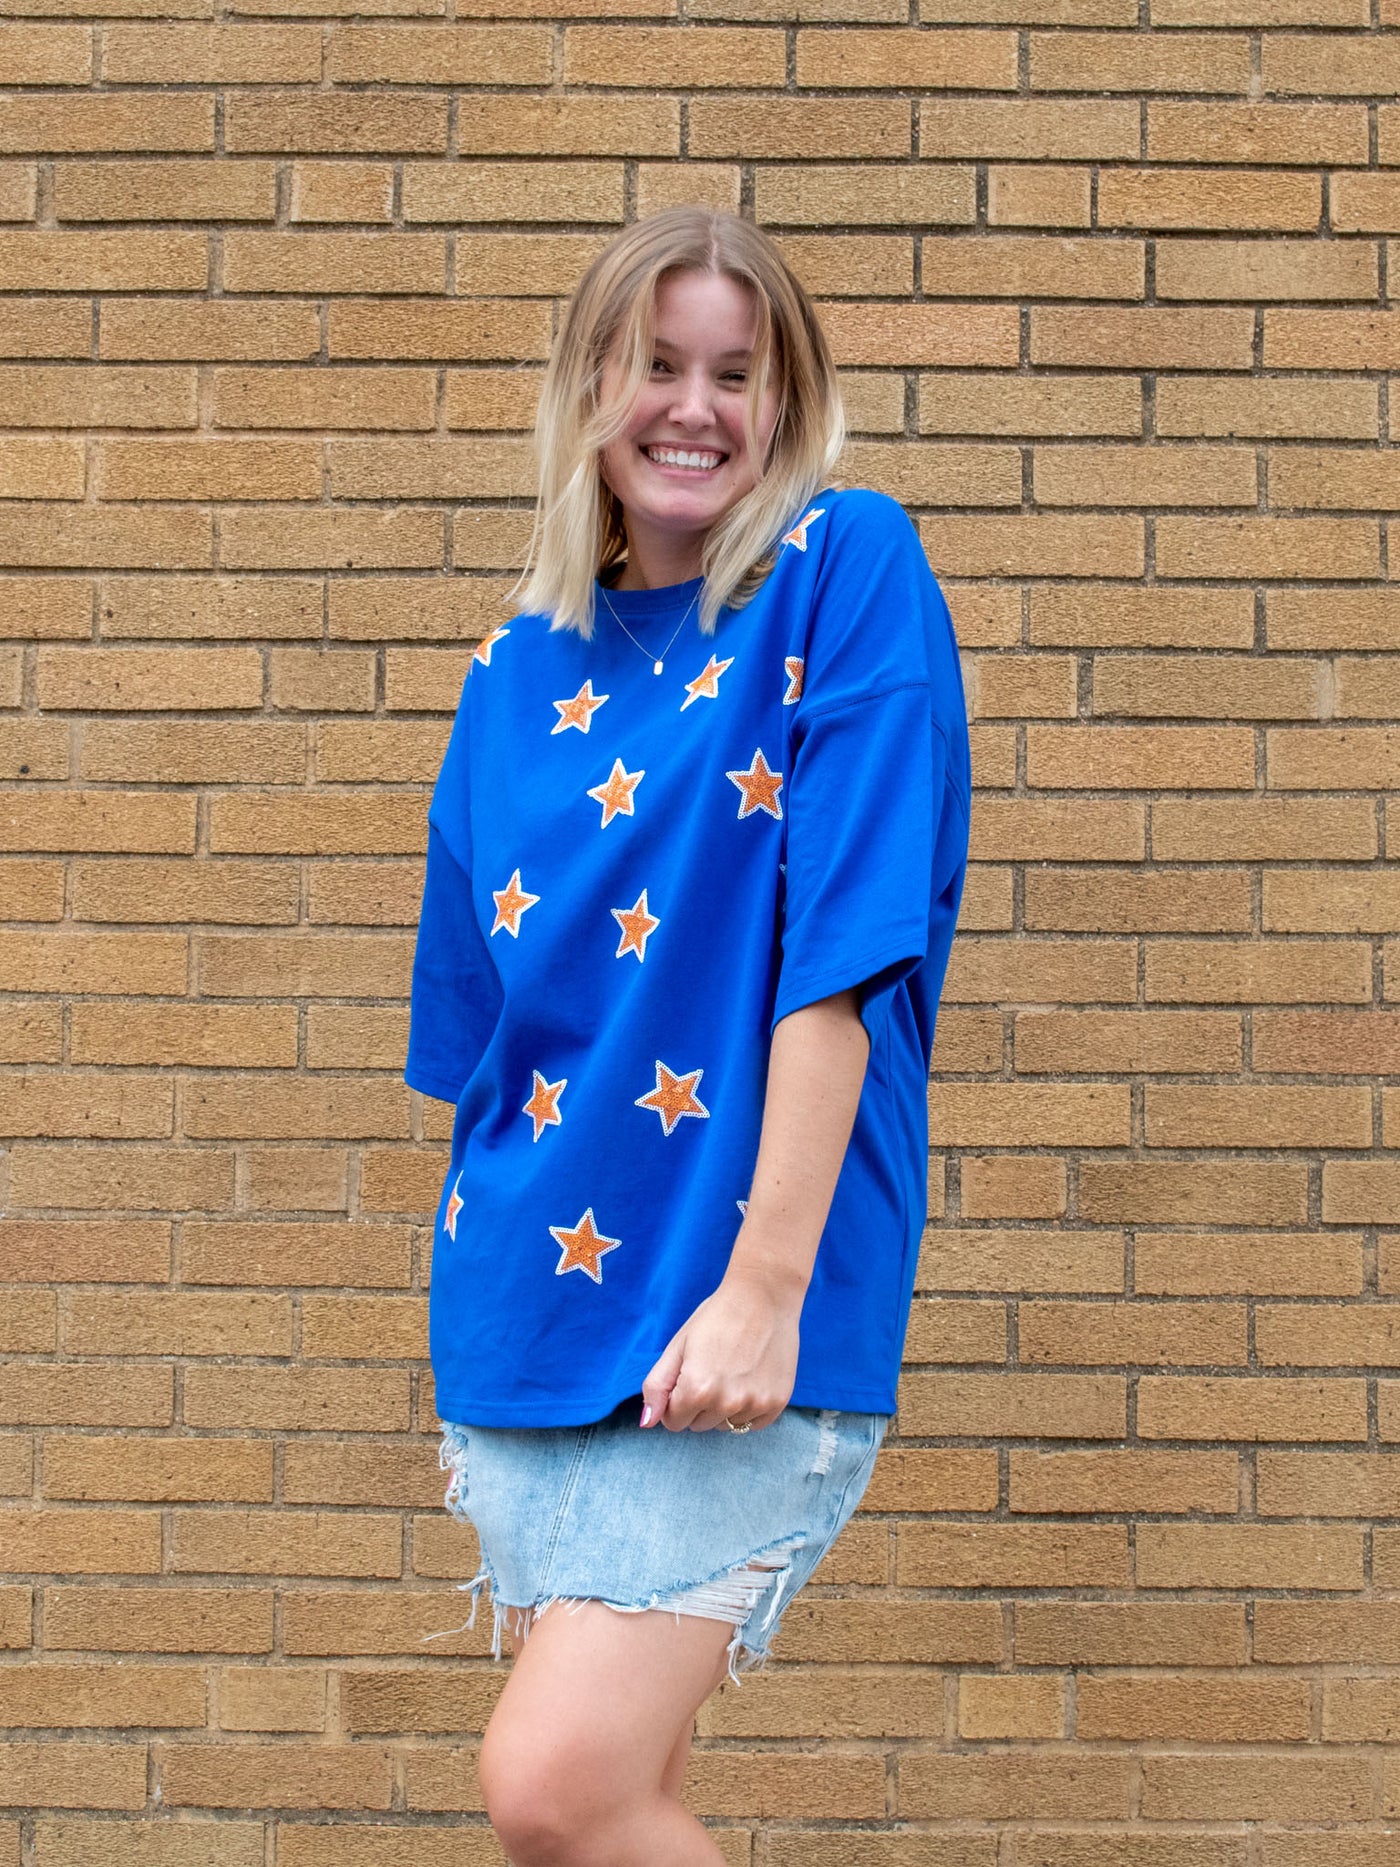 A model wearing a blue oversized tee with gold and white sparkly stars on it. The model has it paired with a light washed denim skirt.